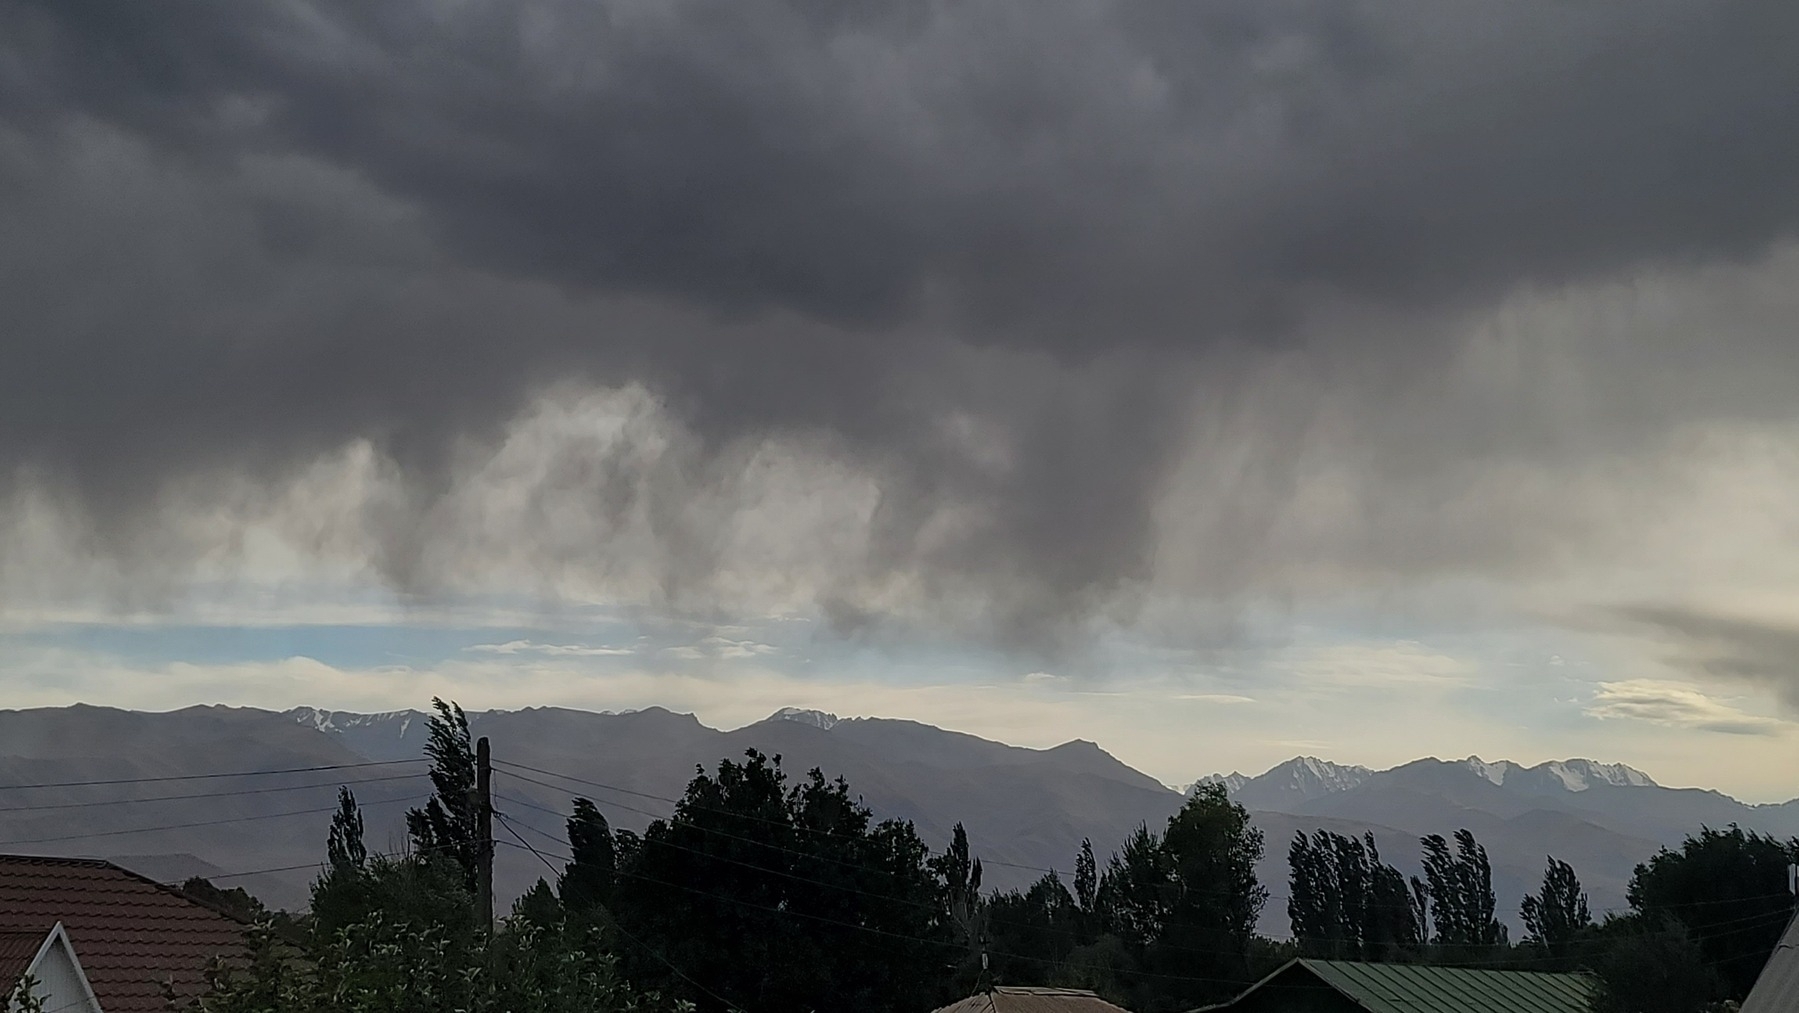 gray rain clouds over mountains in the distance. trees and rooftops closer to the foreground